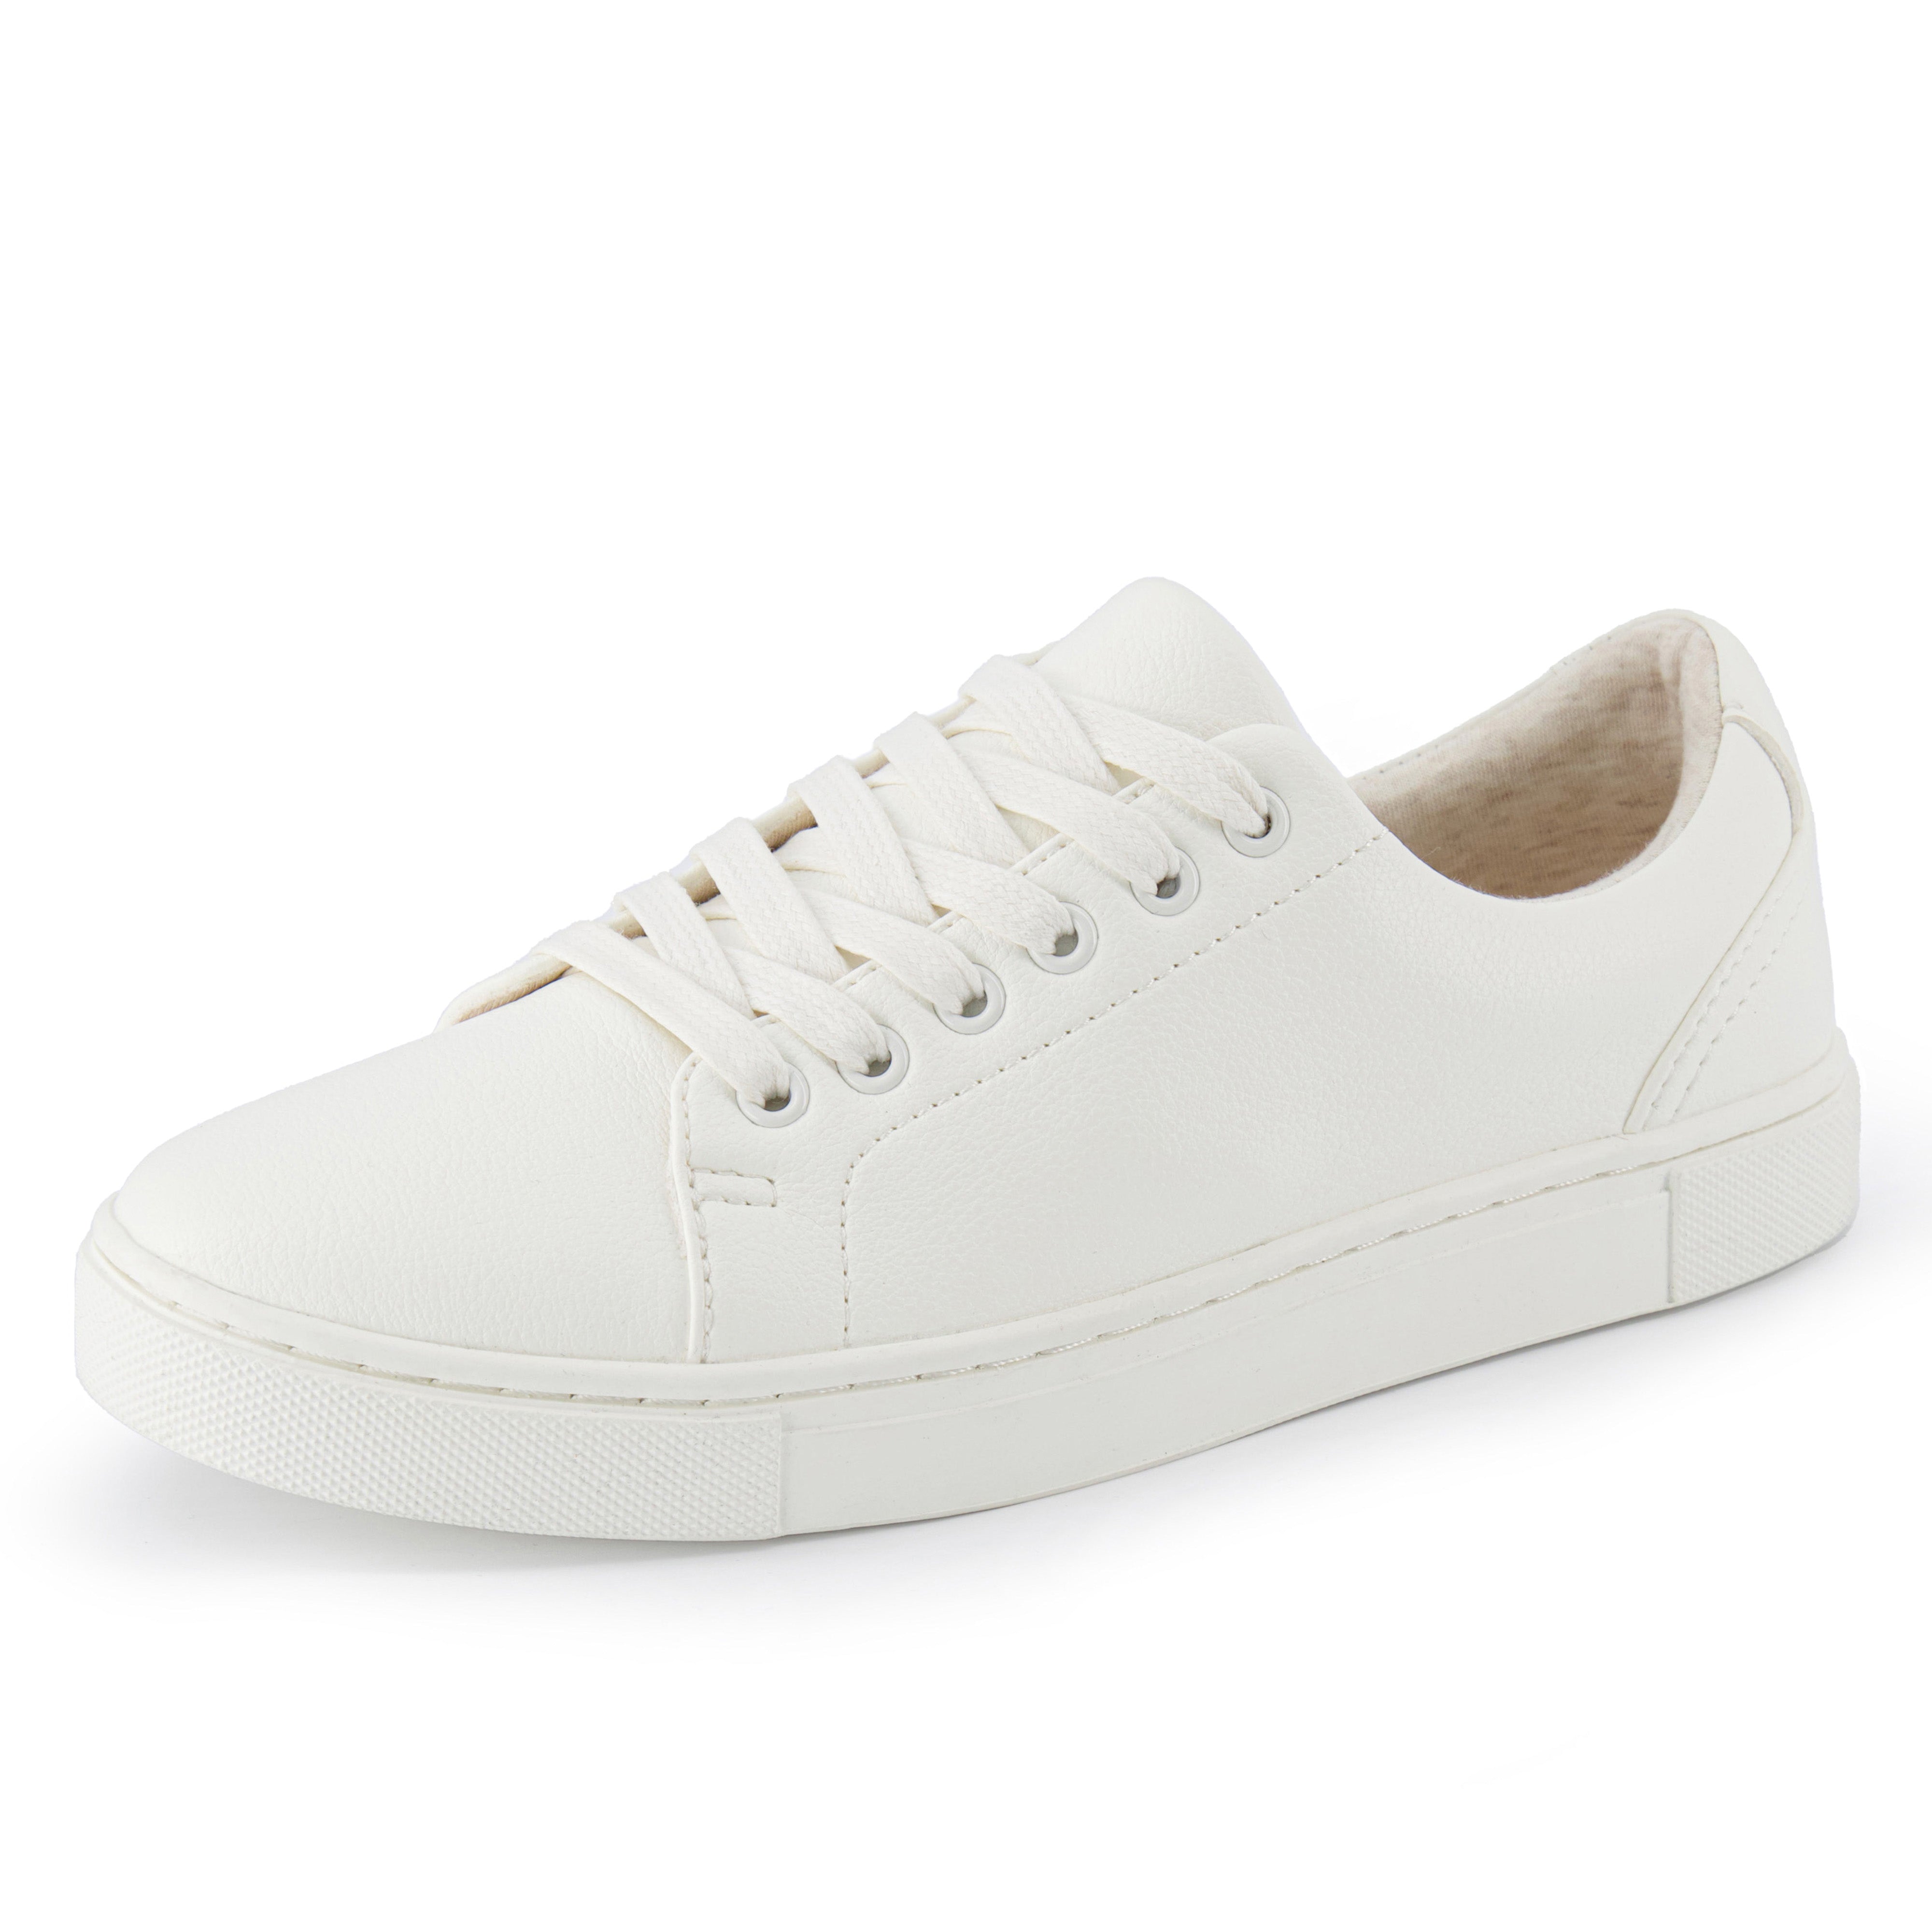 Buy Msgm Sneakers & Casual shoes online - 46 products | FASHIOLA.in